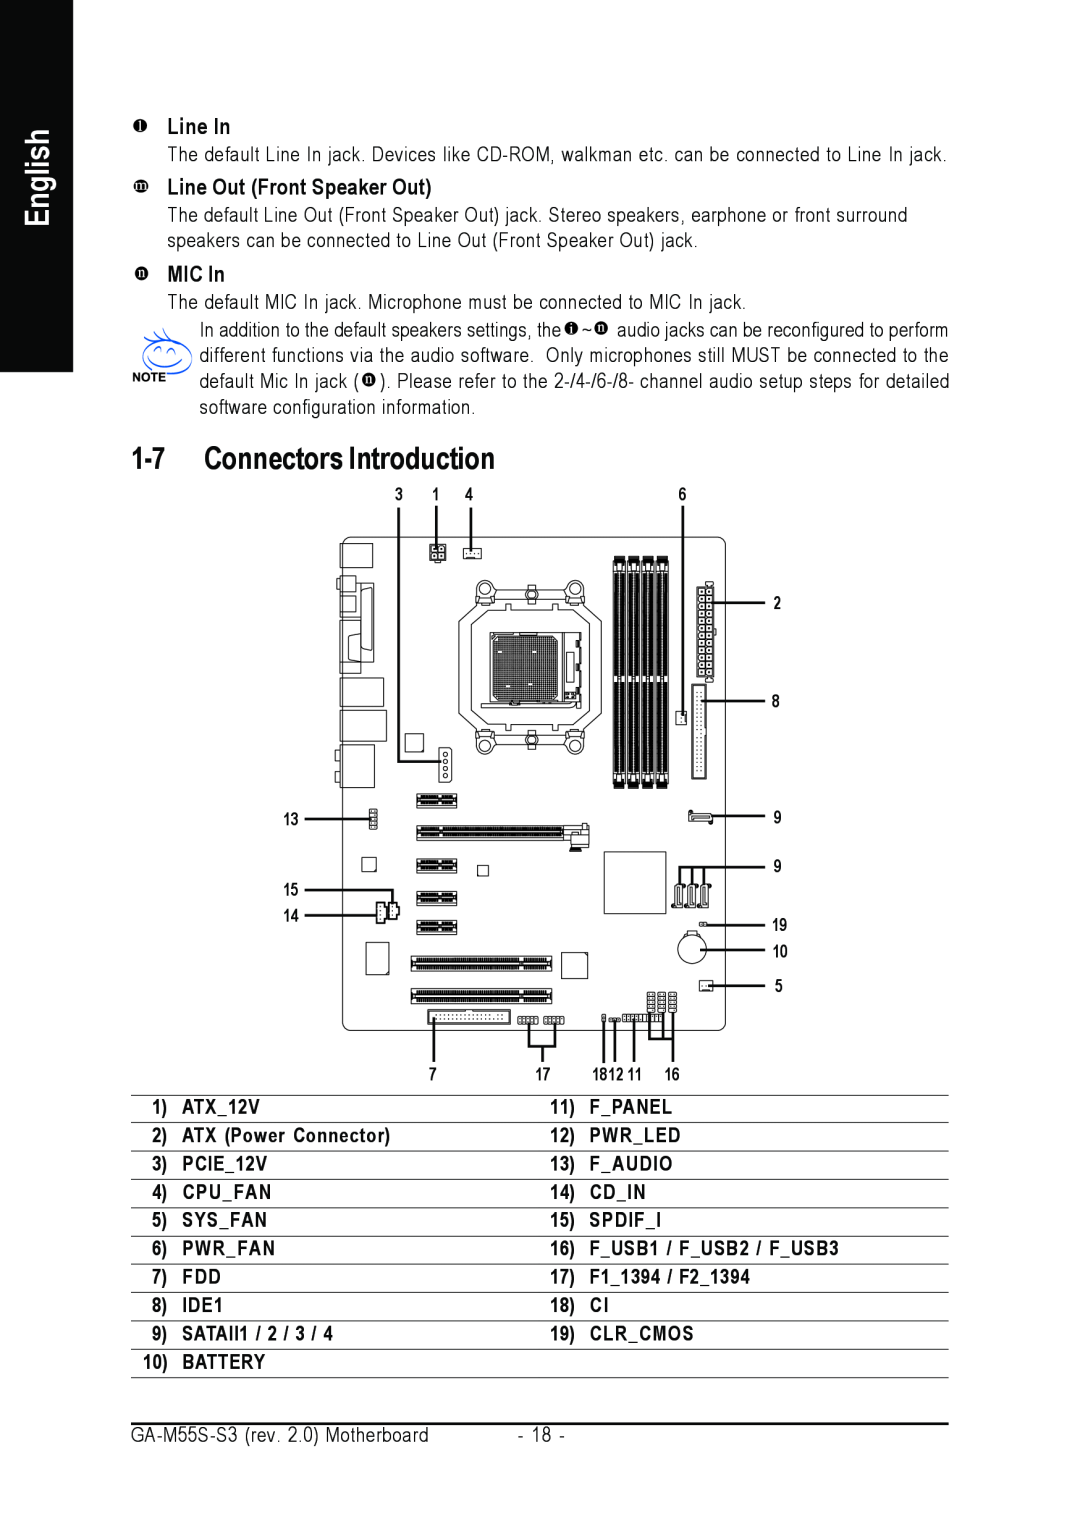 Gigabyte GA-M55S-S3 user manual Connectors Introduction, Line In, Line Out Front Speaker Out, MIC In, English 